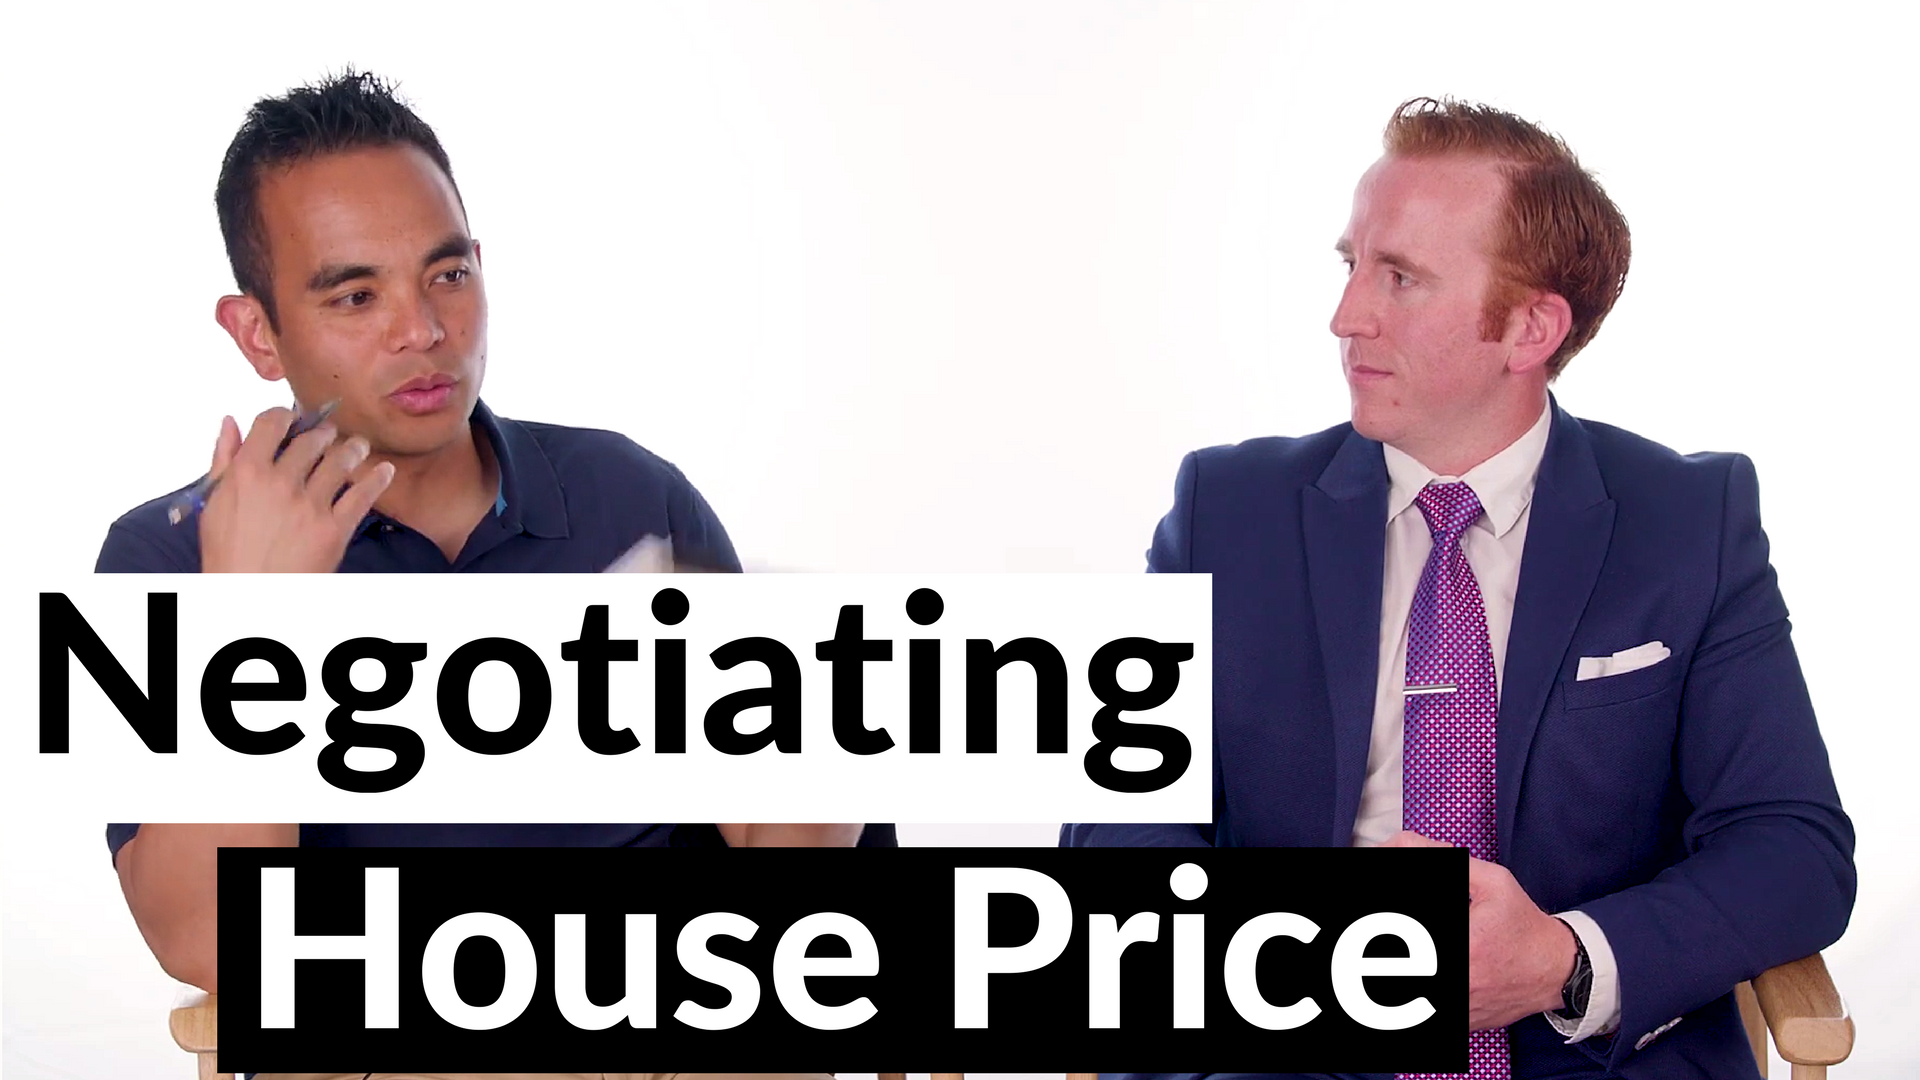 How to negotiate the price when buying a house (and tips to get started)